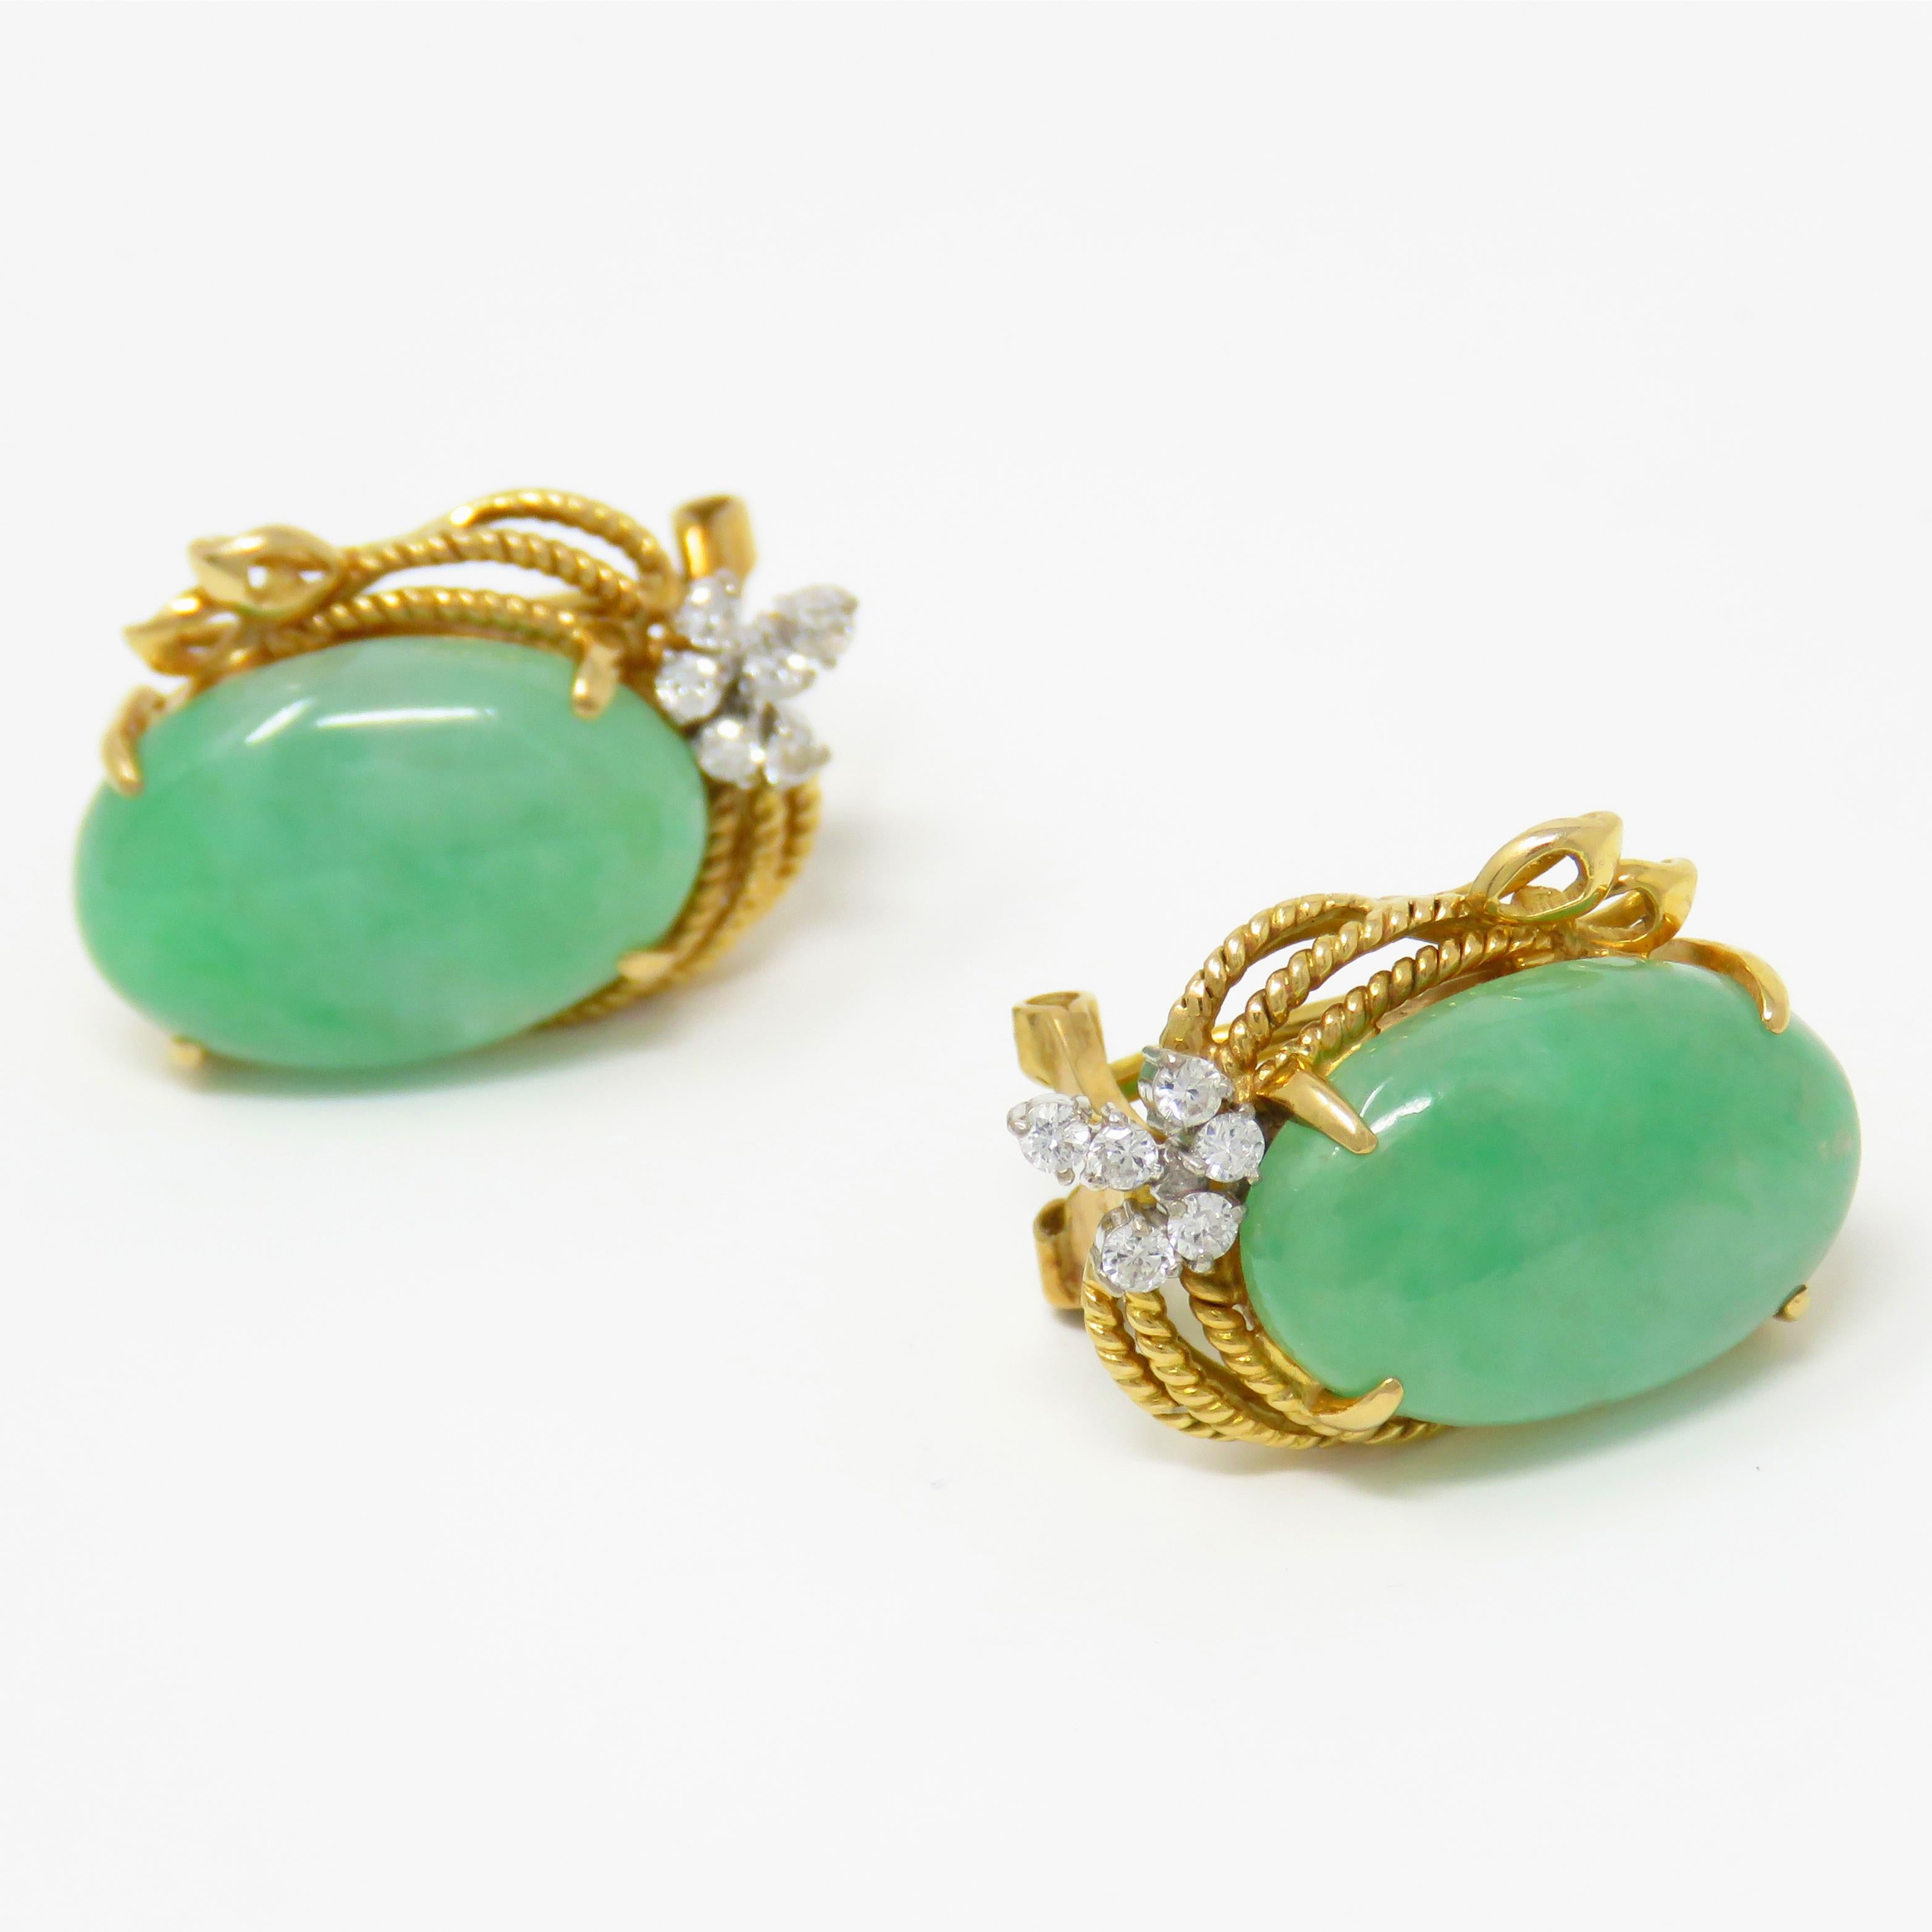 Beautiful vintage VS diamond and jade earrings set in a lovely 14k gold roping framework.  The earrings come with a GIA Certification dated 09/11/2017 stated, 